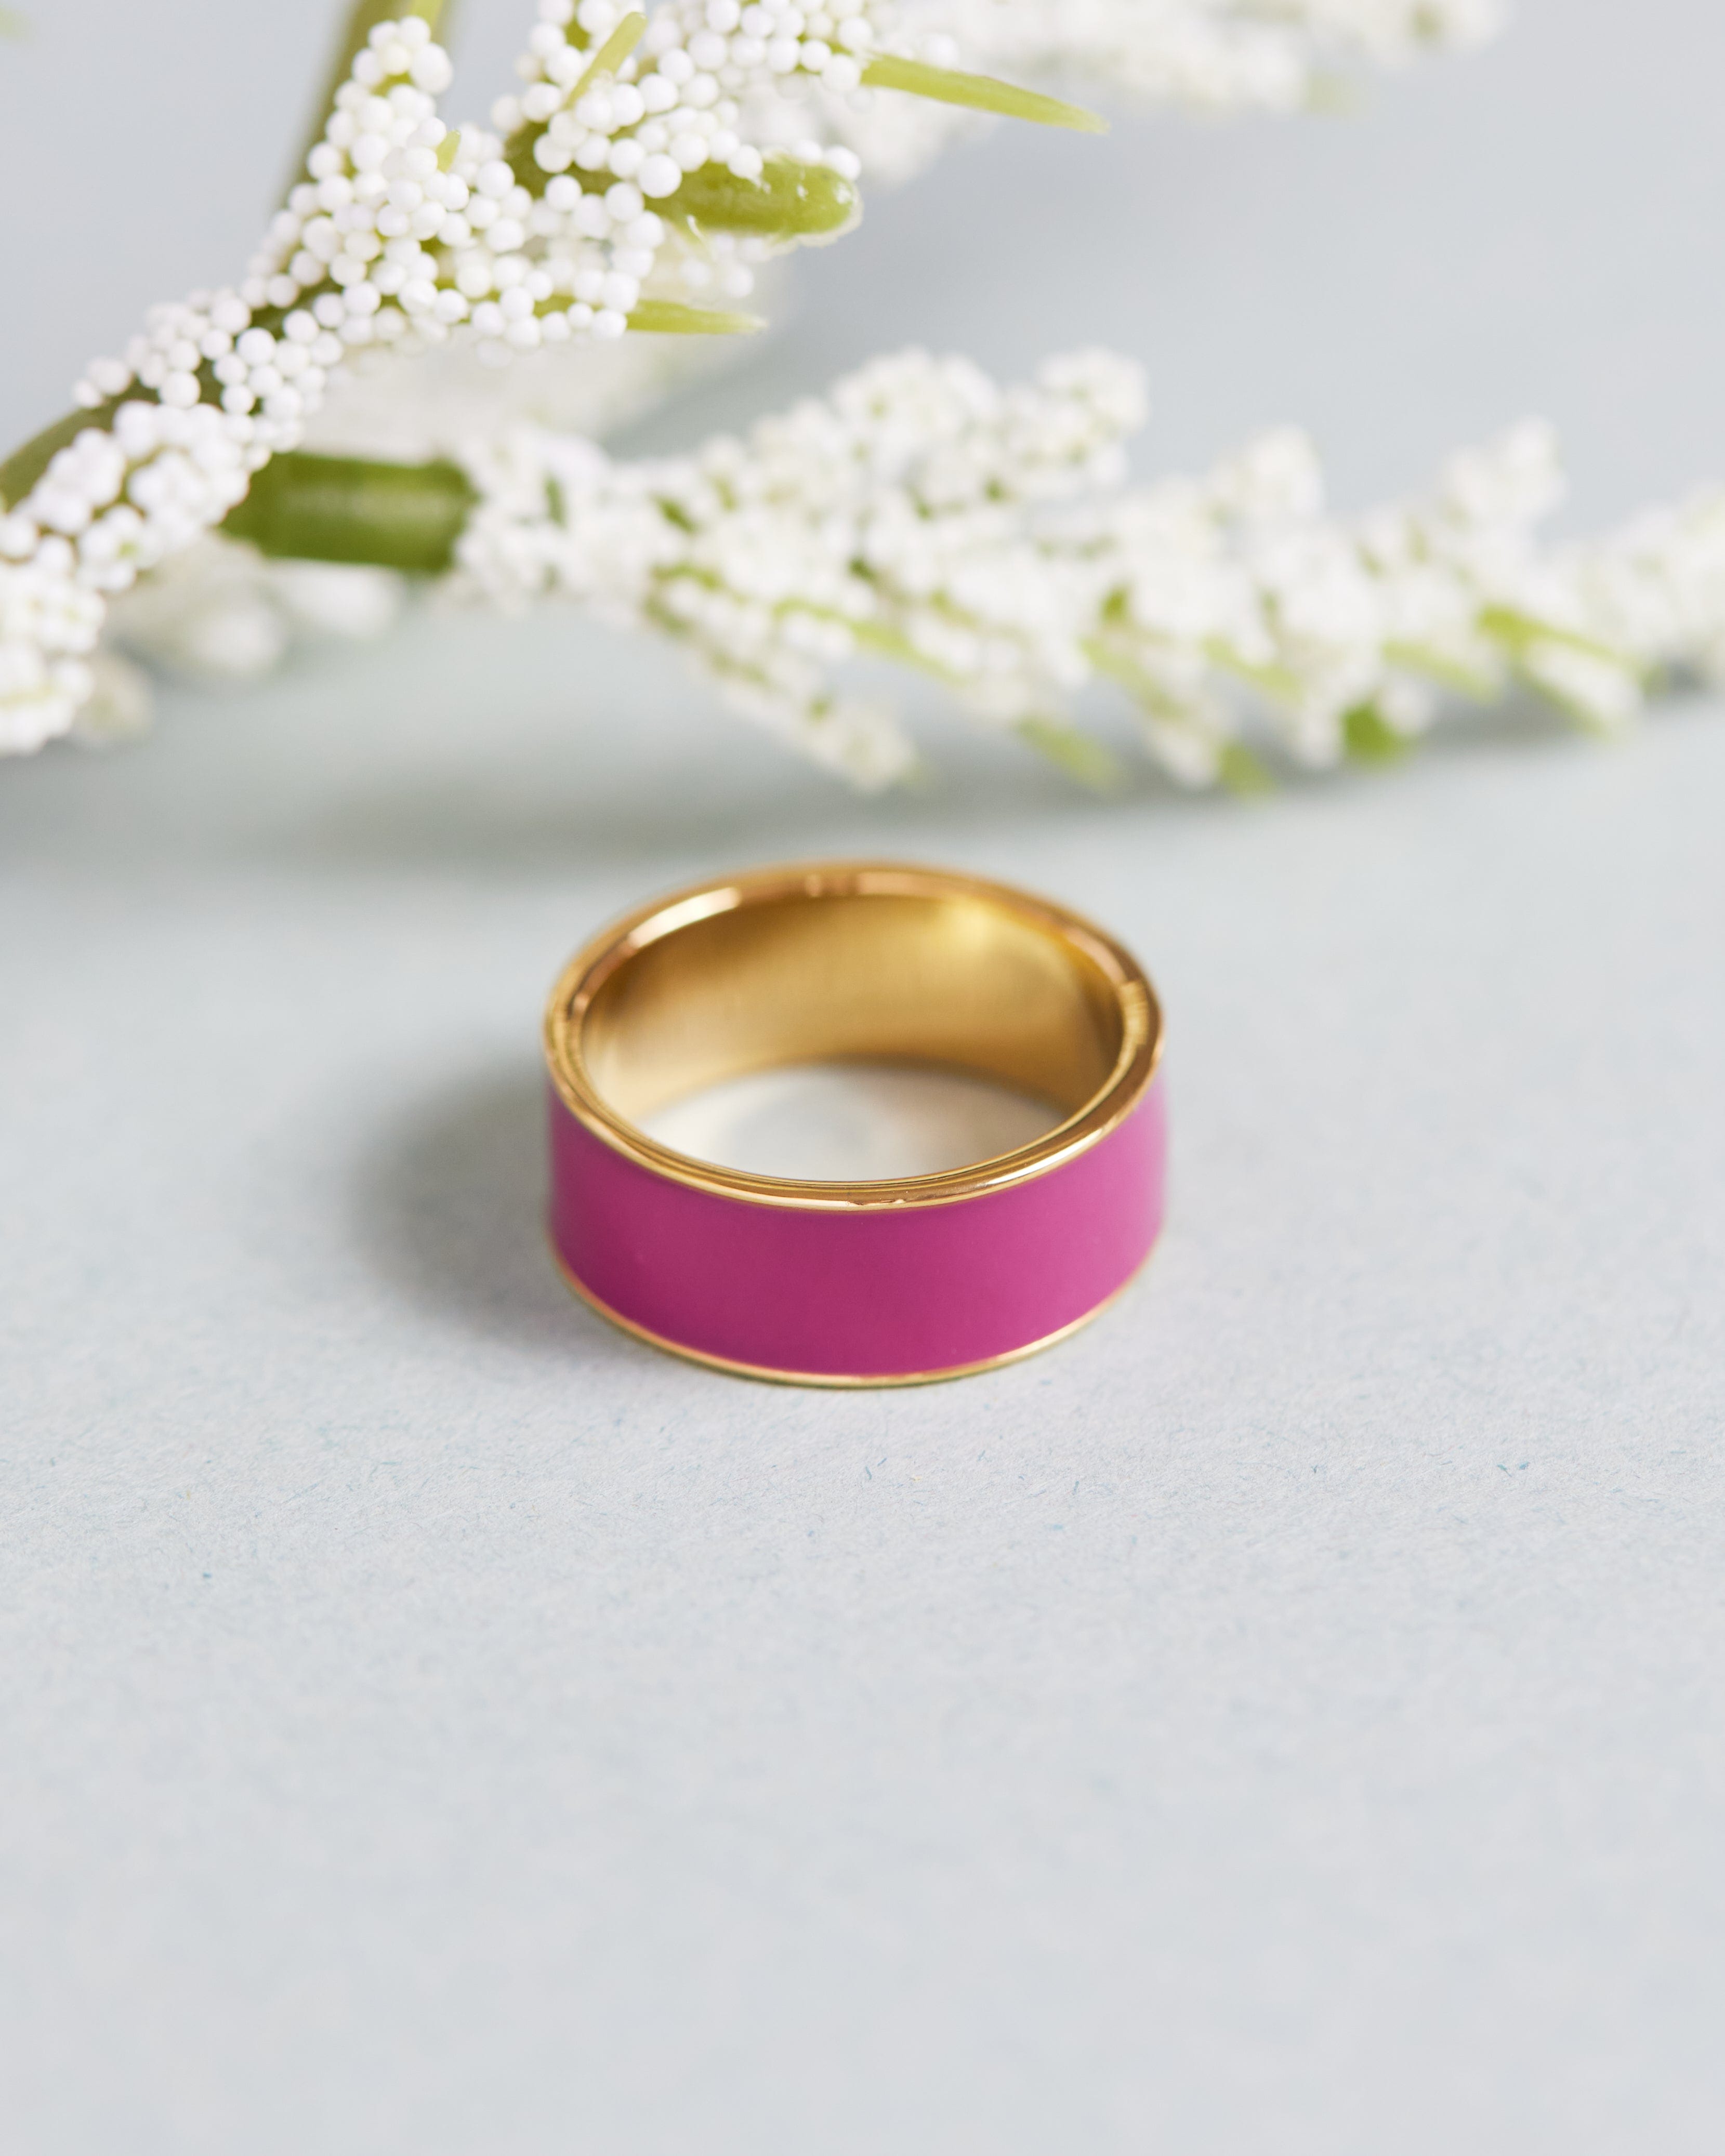 Gold and pink thick ring